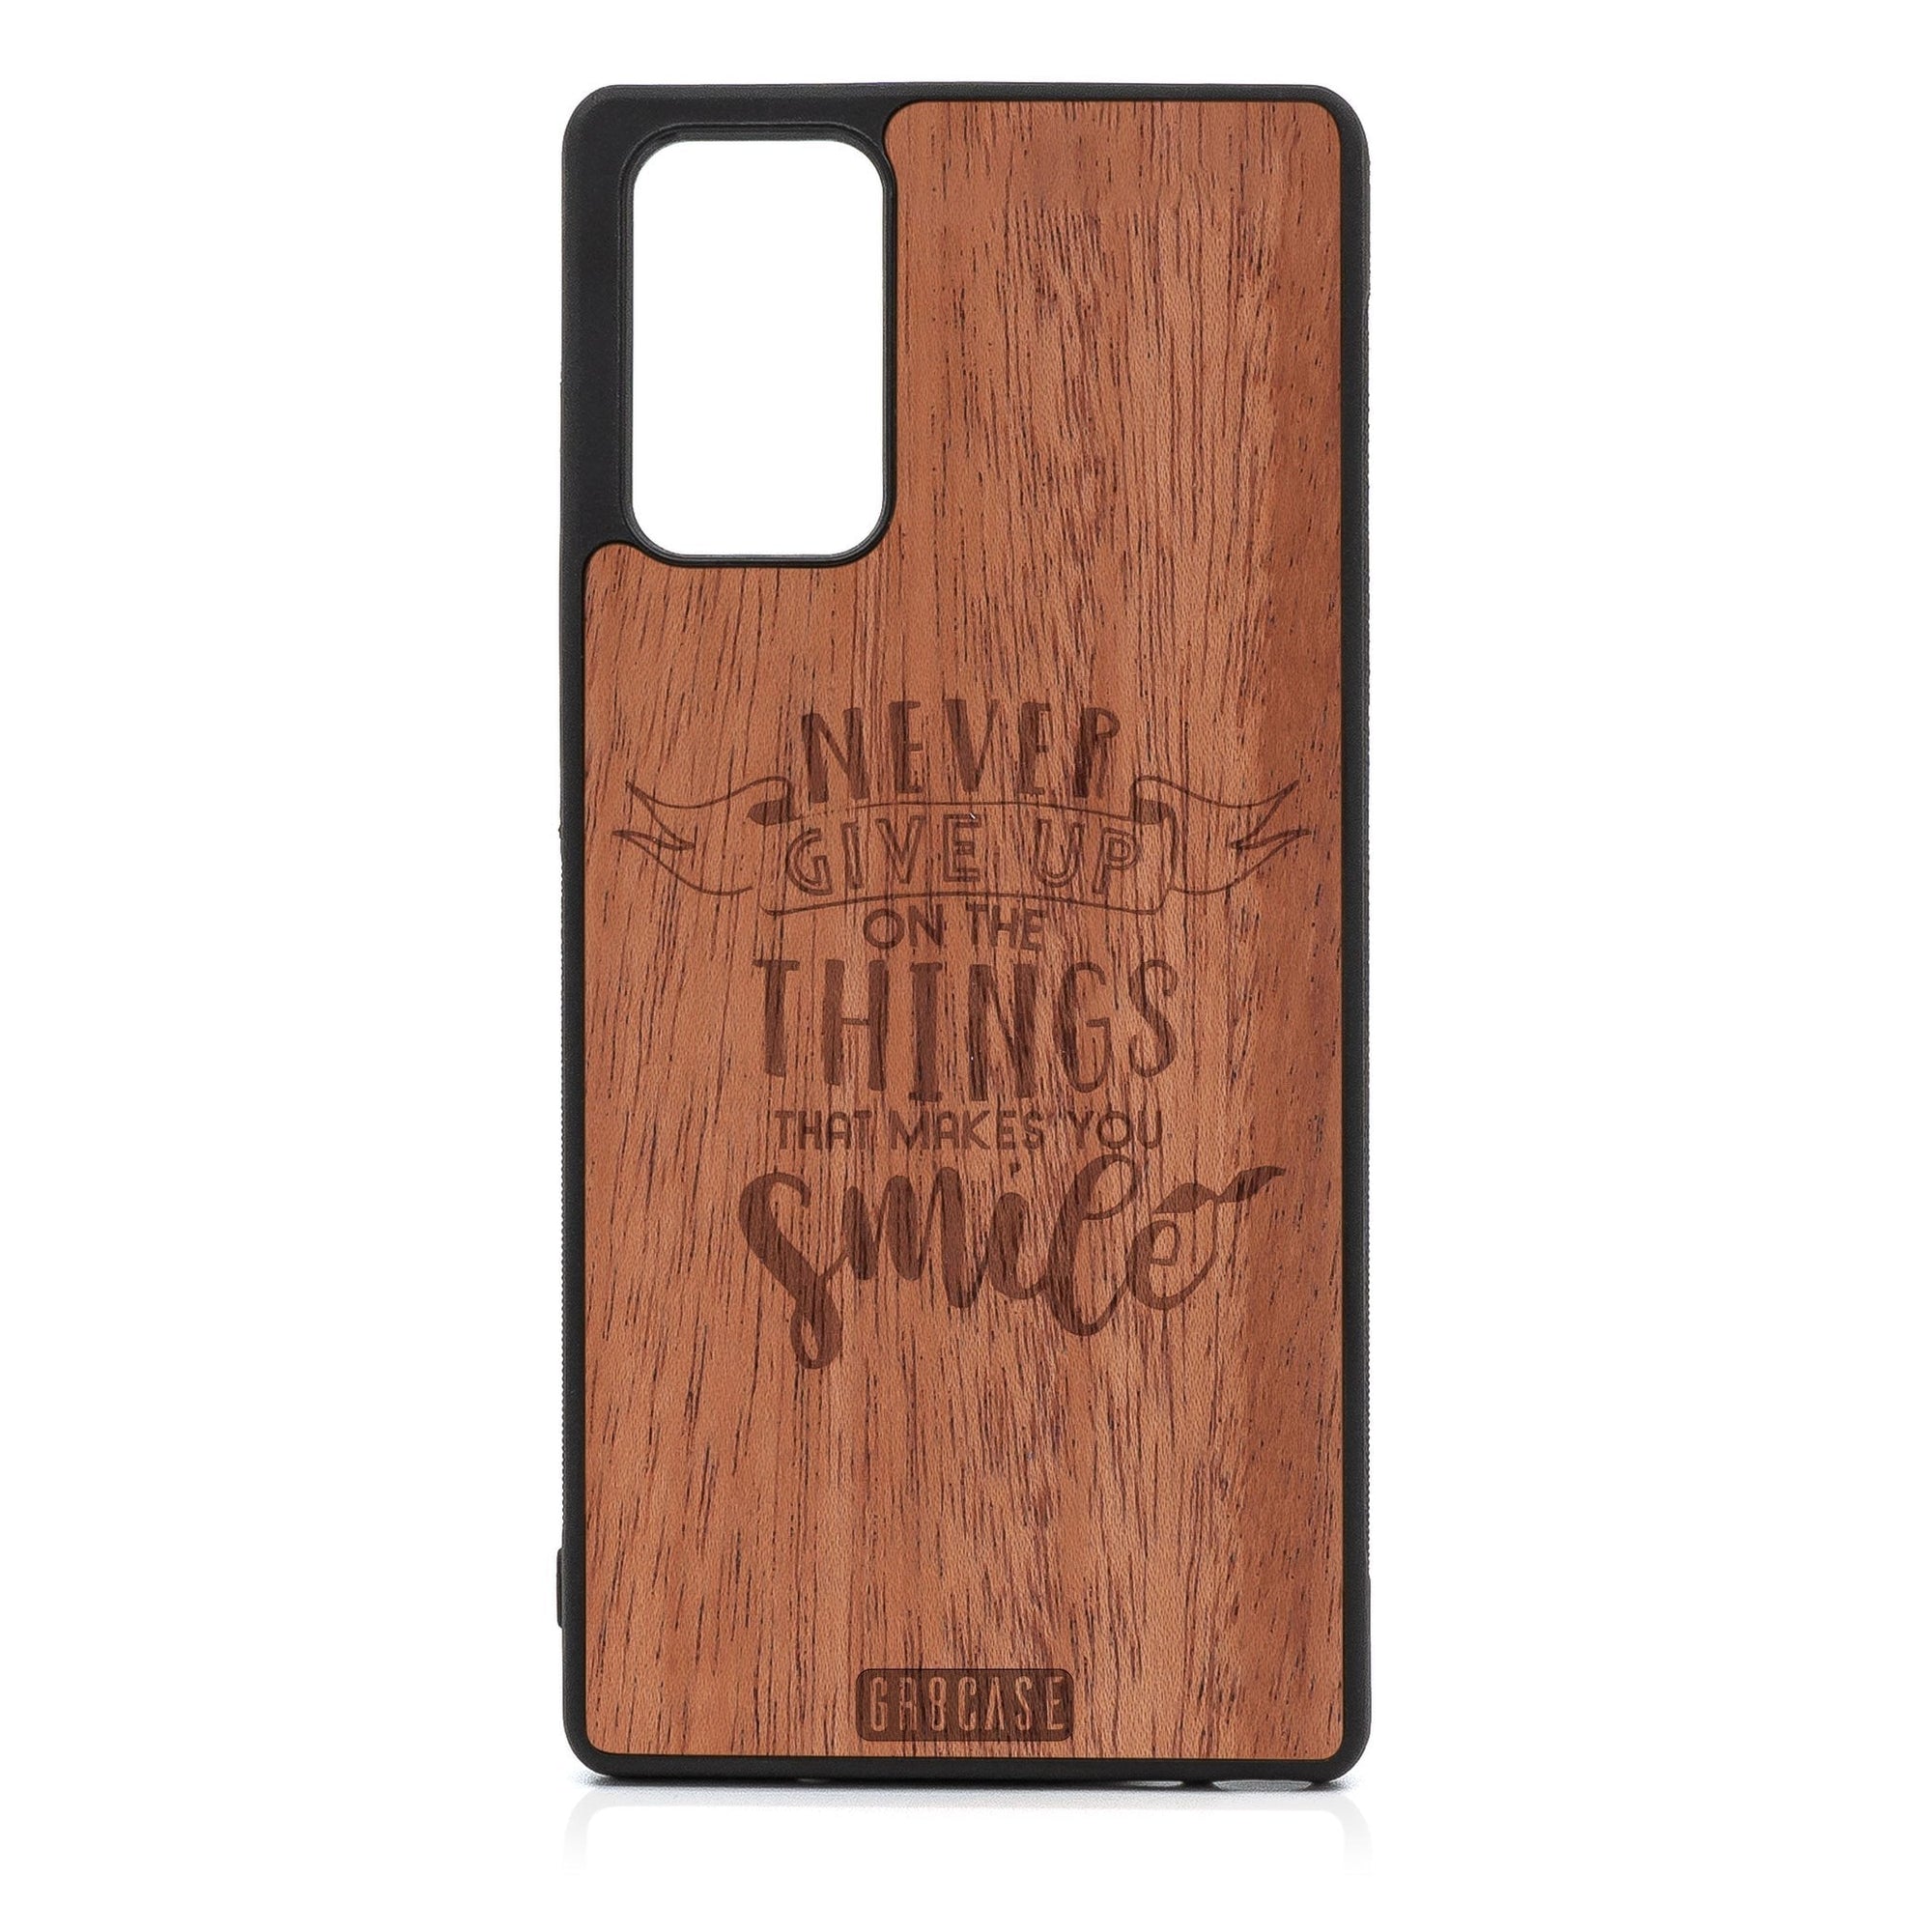 Never Give Up On The Things That Makes You Smile Design Wood Case For Samsung Galaxy A72 5G